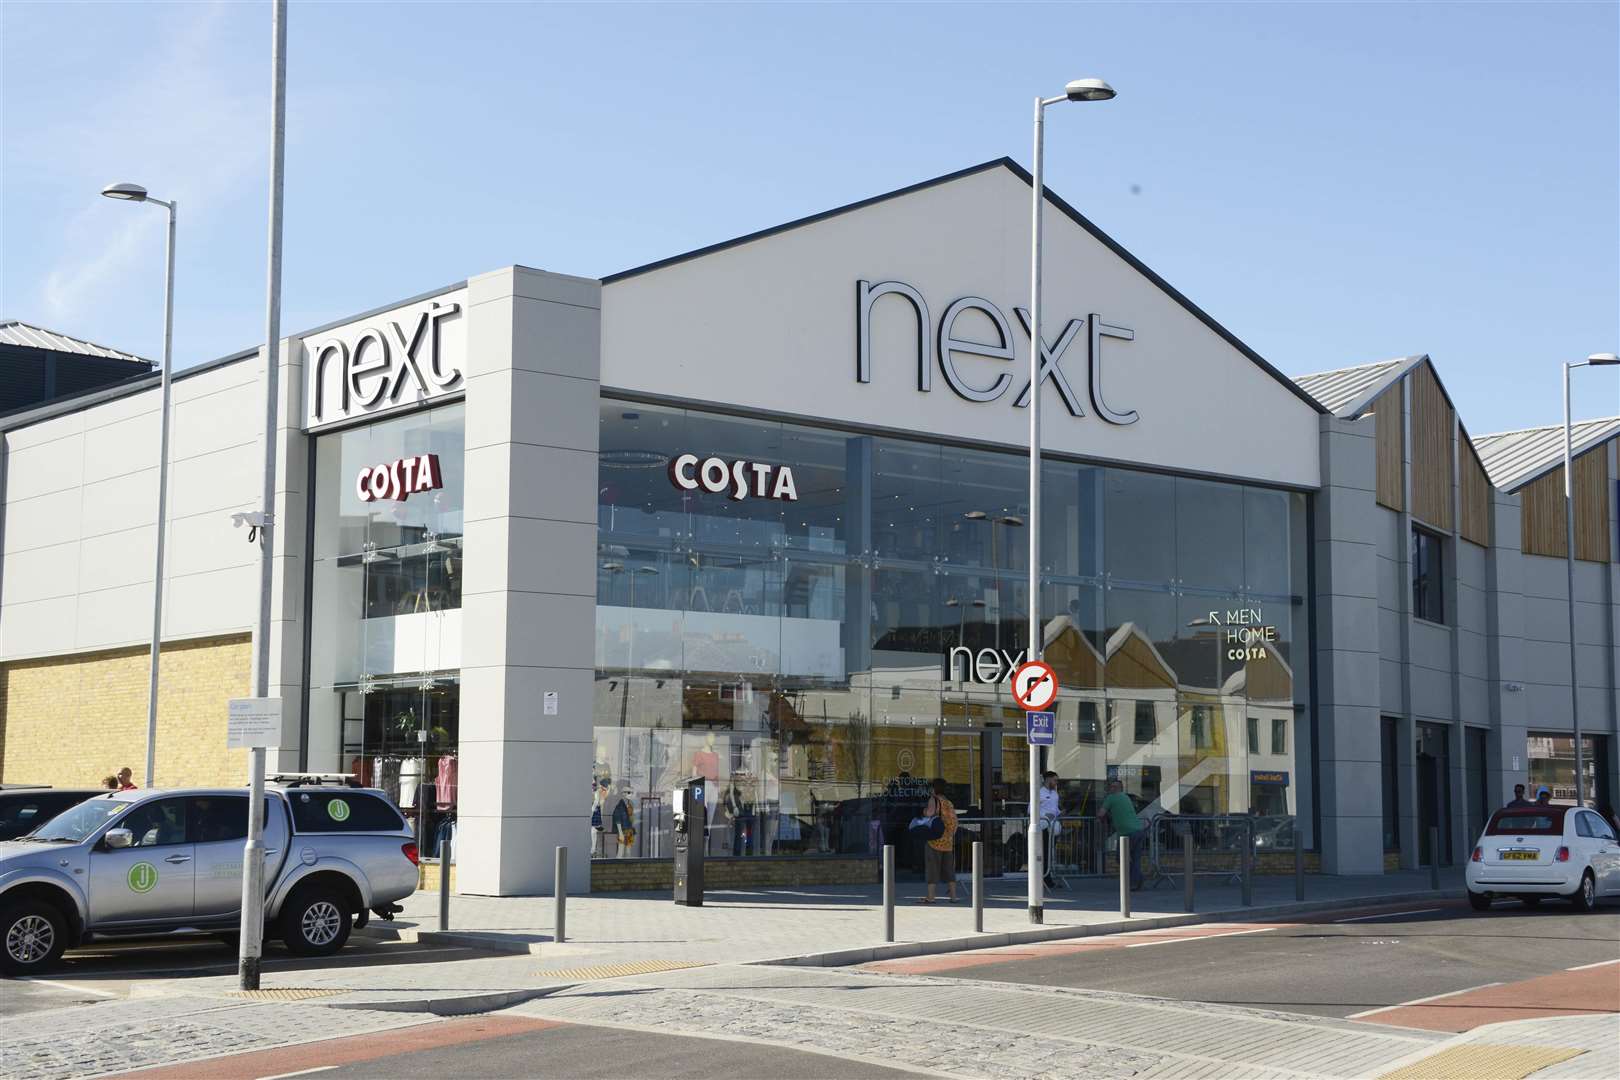 Next clothes store moves to St James' Dover after leaving Bouverie